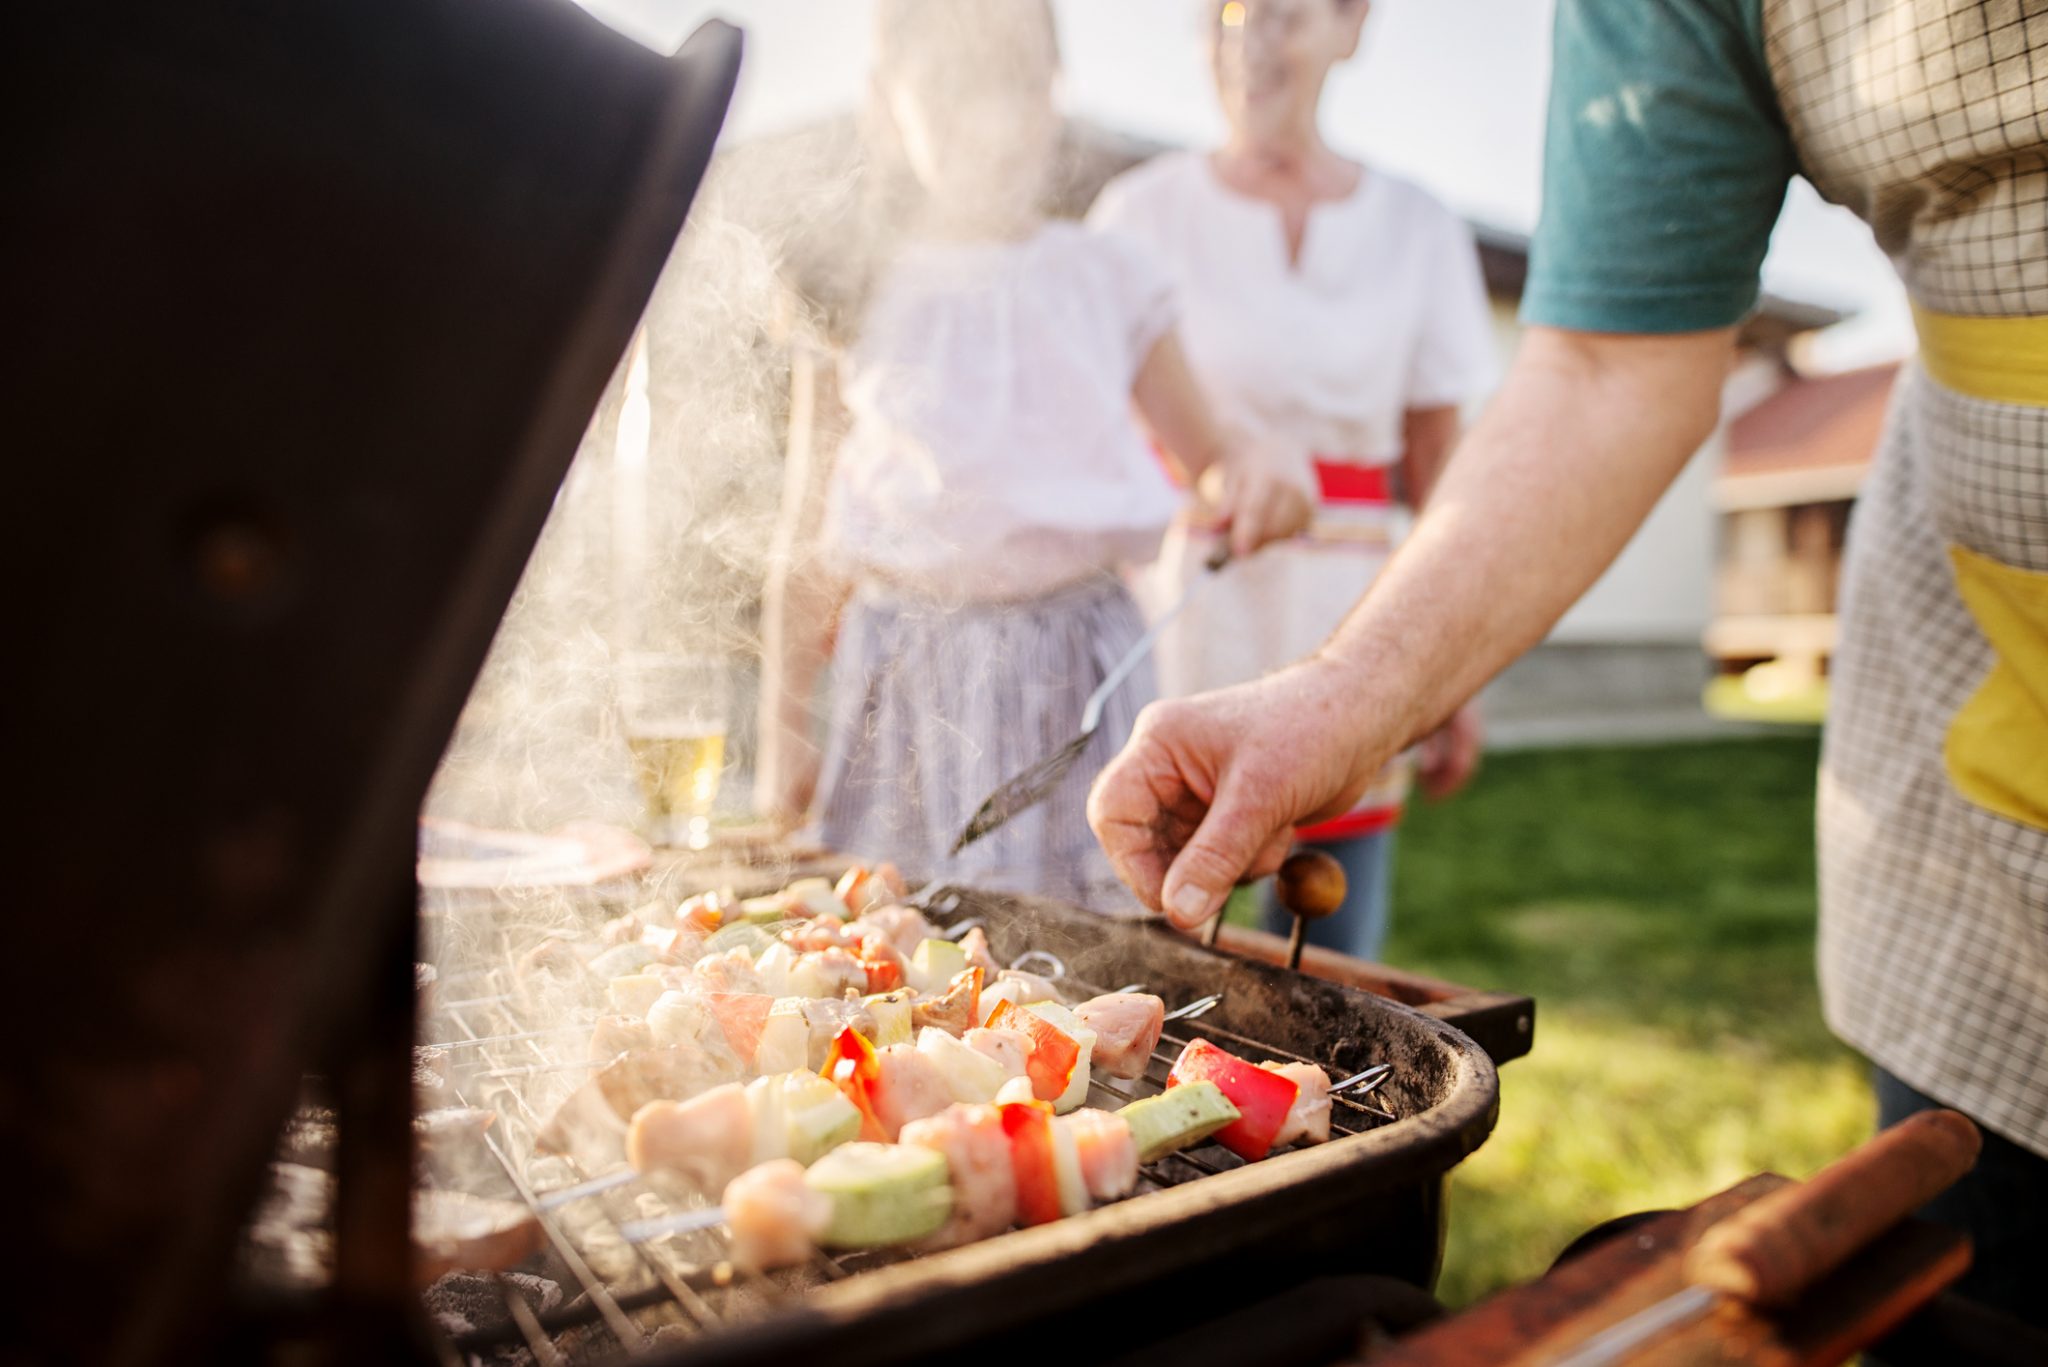 Grill Safety